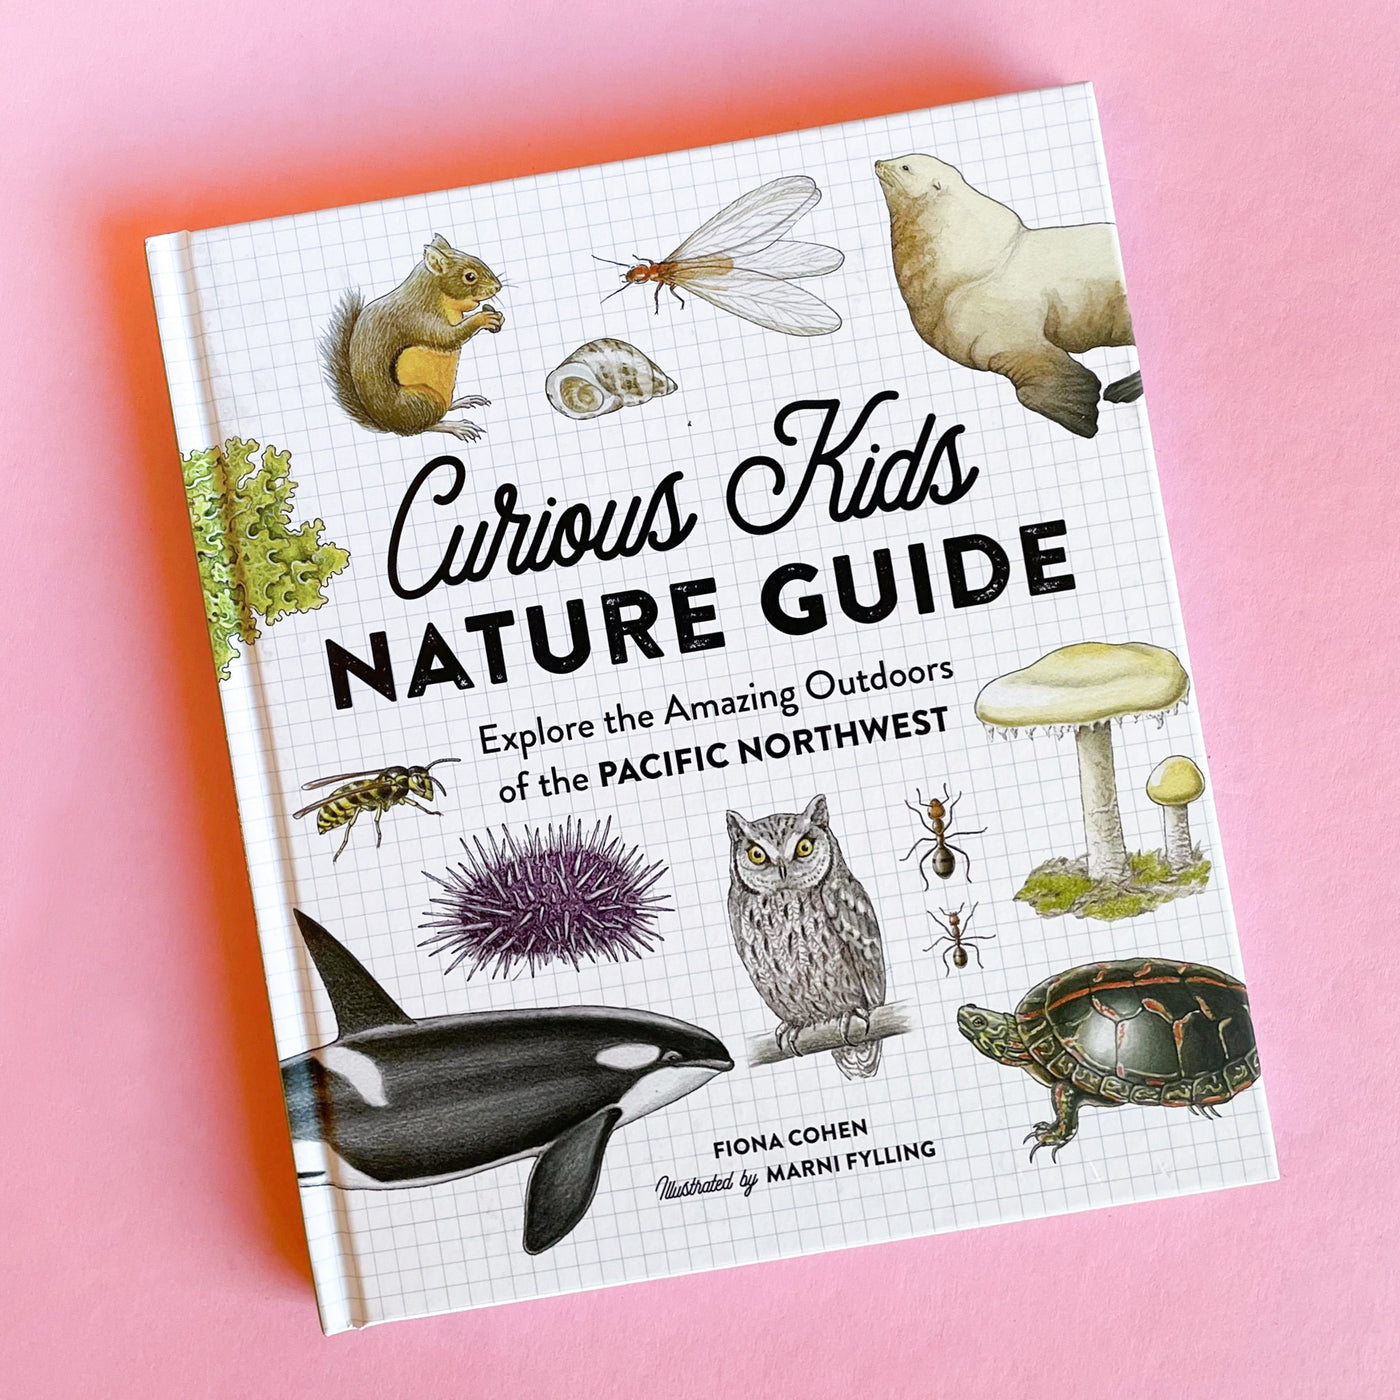 Curious Kids Nature Guide: Explore the Amazing Outdoors of the Pacific Northwest by Fiona Cohen and Marni Fylling